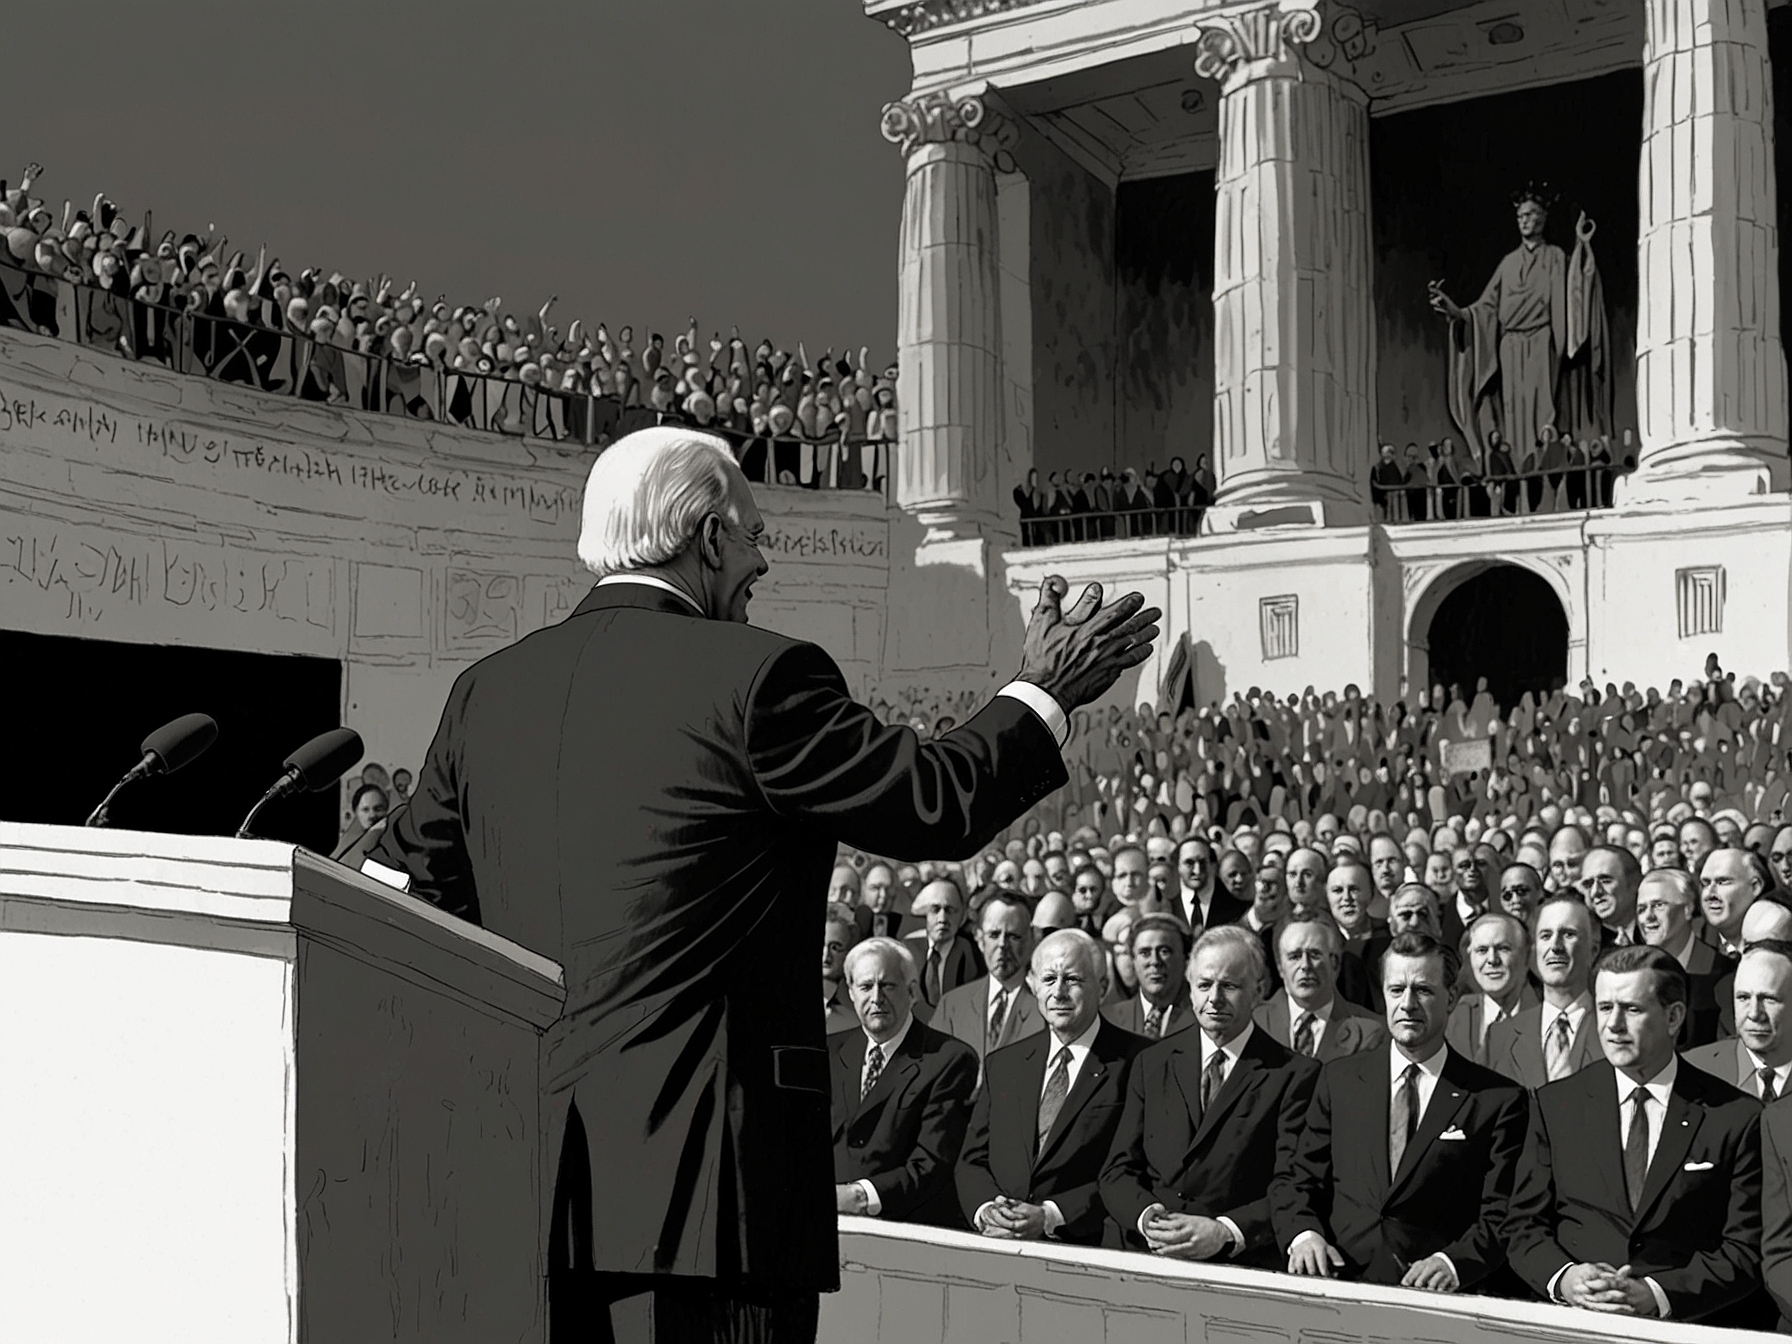 An illustration of Joe Biden addressing a crowd, emphasizing his decades-long political career and experience in governance, showcasing the backdrop of the U.S. Capitol.